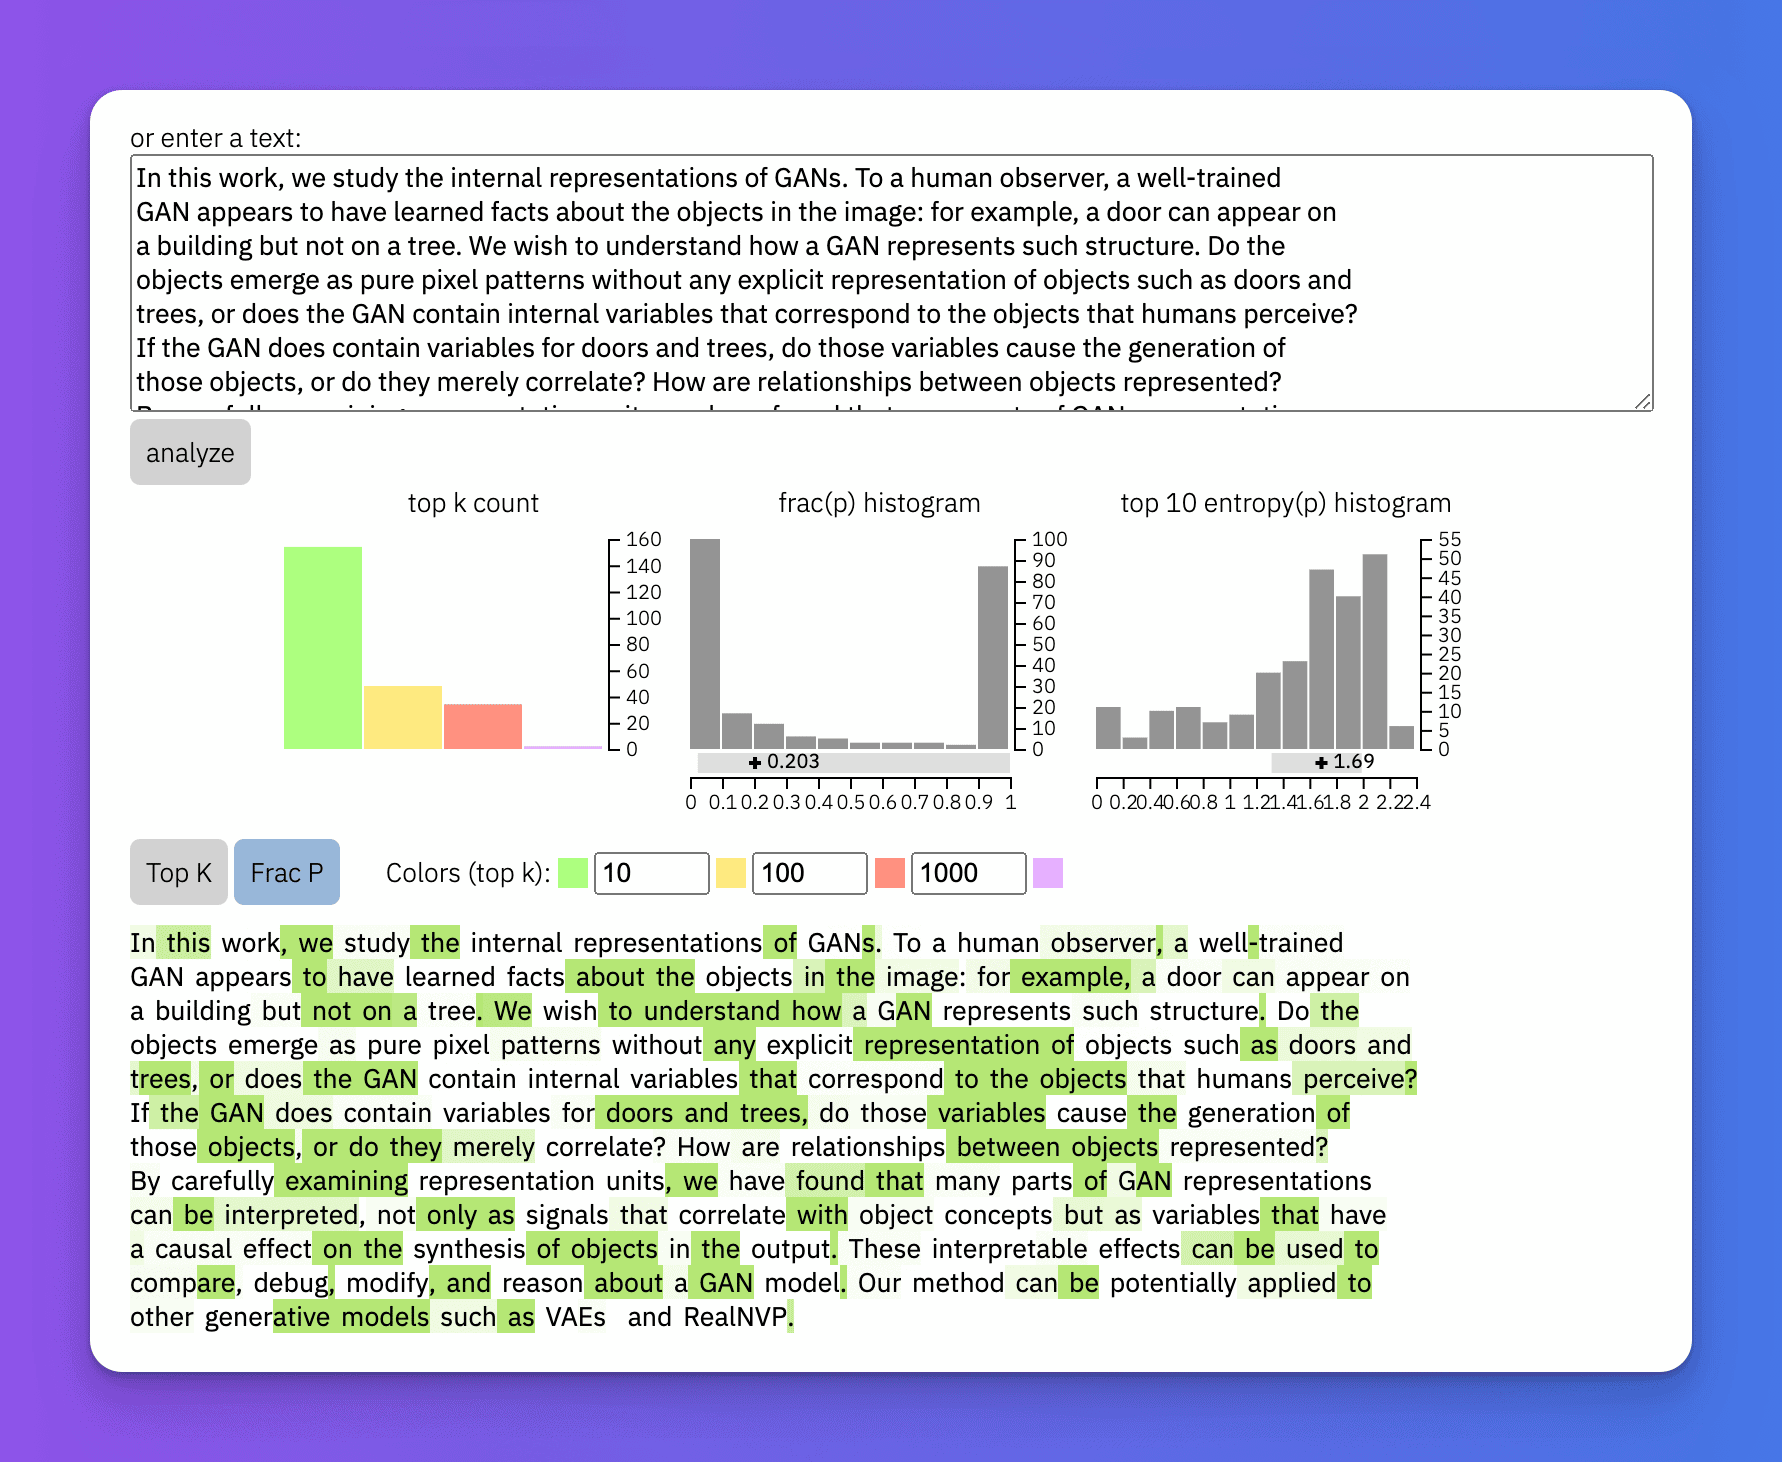 Academic non-AI-written text with low likelihood of being AI-produced